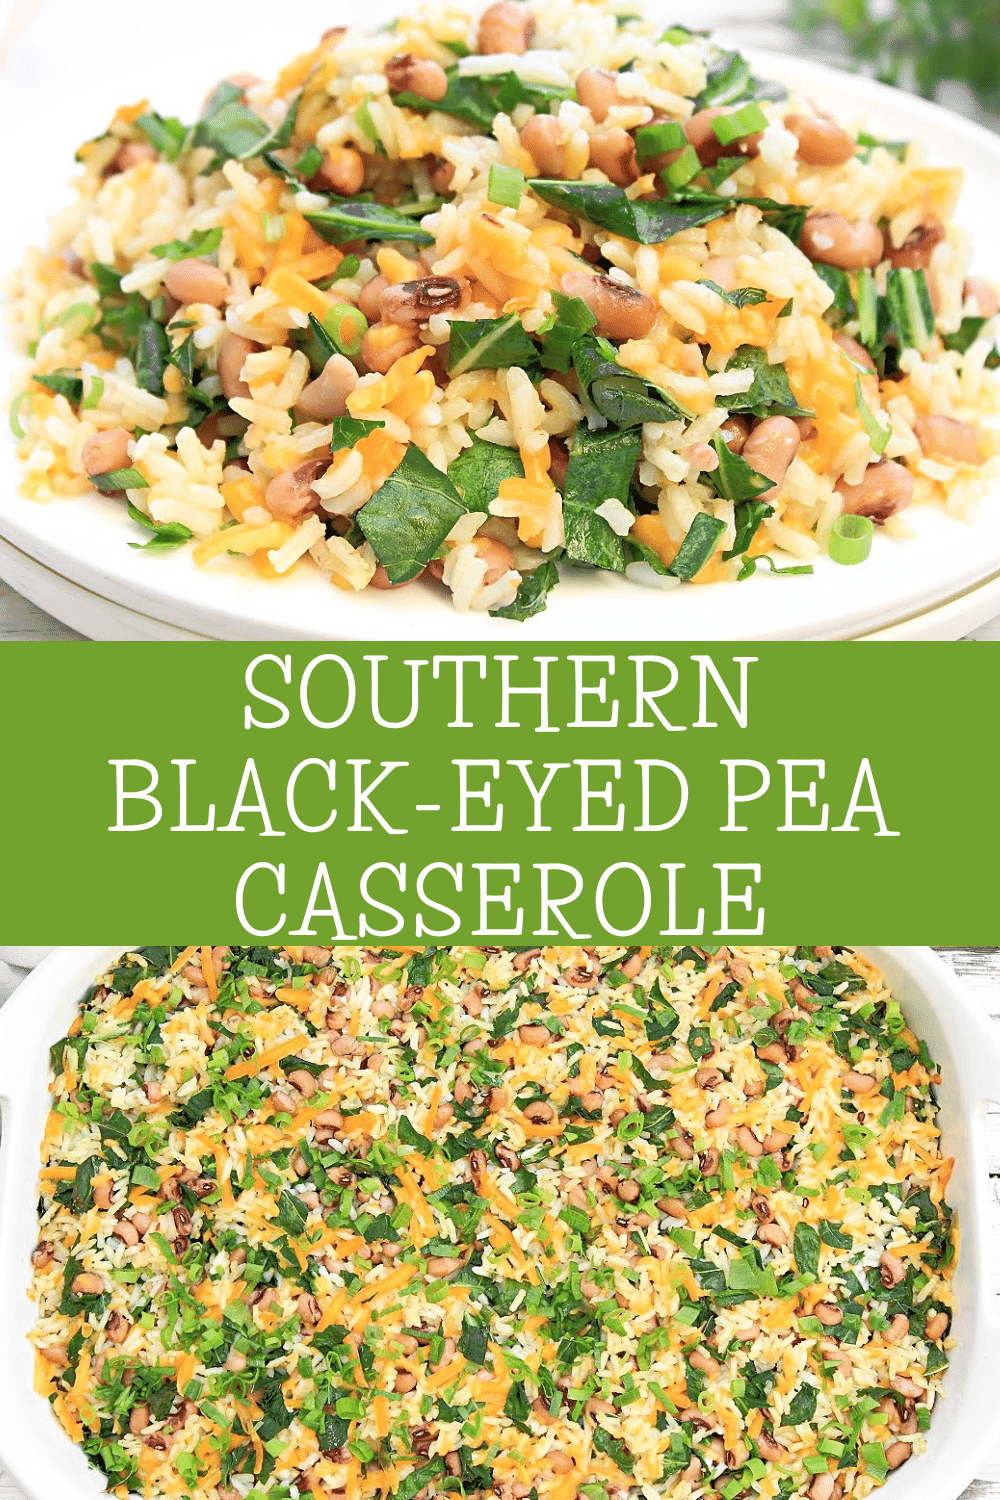 Black-Eyed Pea Casserole with Rice and Collard Greens ~ Easy to make and budget-friendly.  Serve with homemade cornbread for New Year's Day! via @thiswifecooks